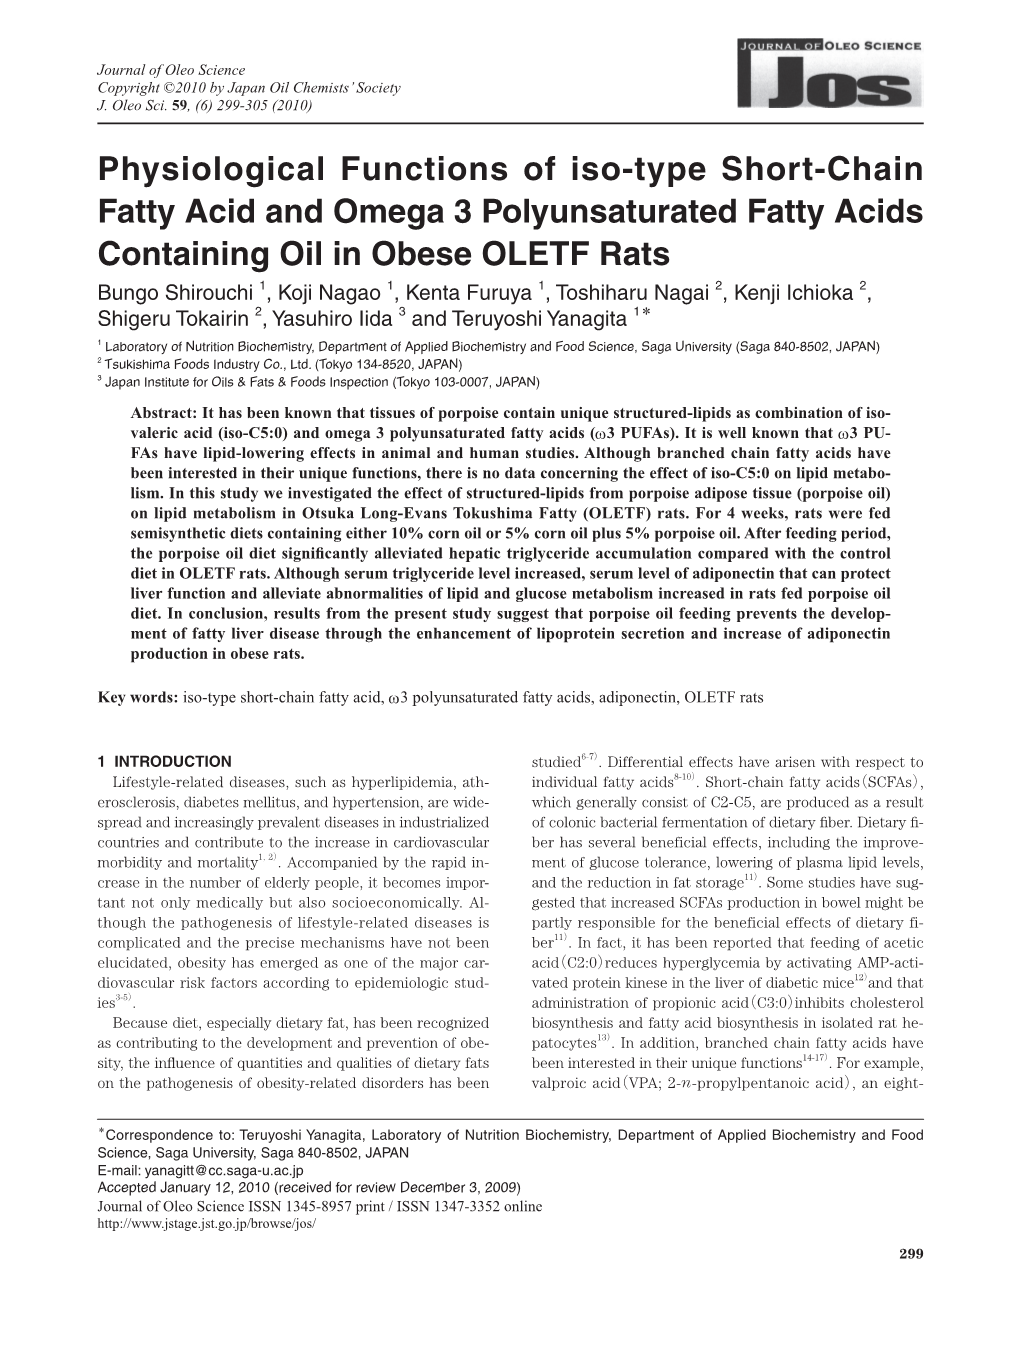 Physiological Functions of Iso-Type Short-Chain Fatty Acid and Omega